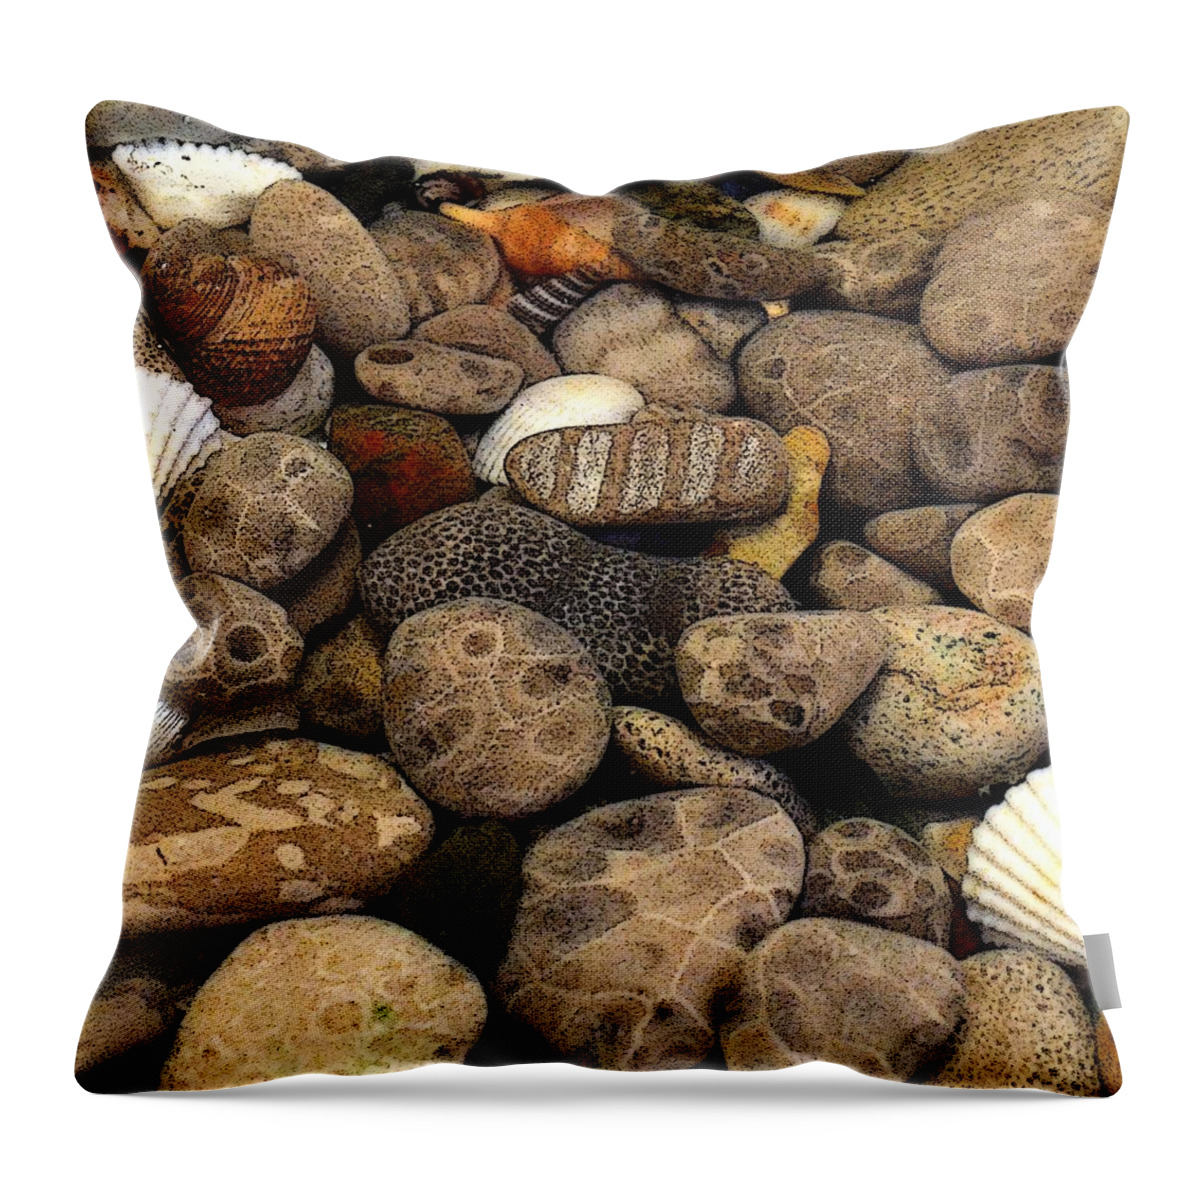 Stone Throw Pillow featuring the photograph Petoskey Stones with Shells l by Michelle Calkins